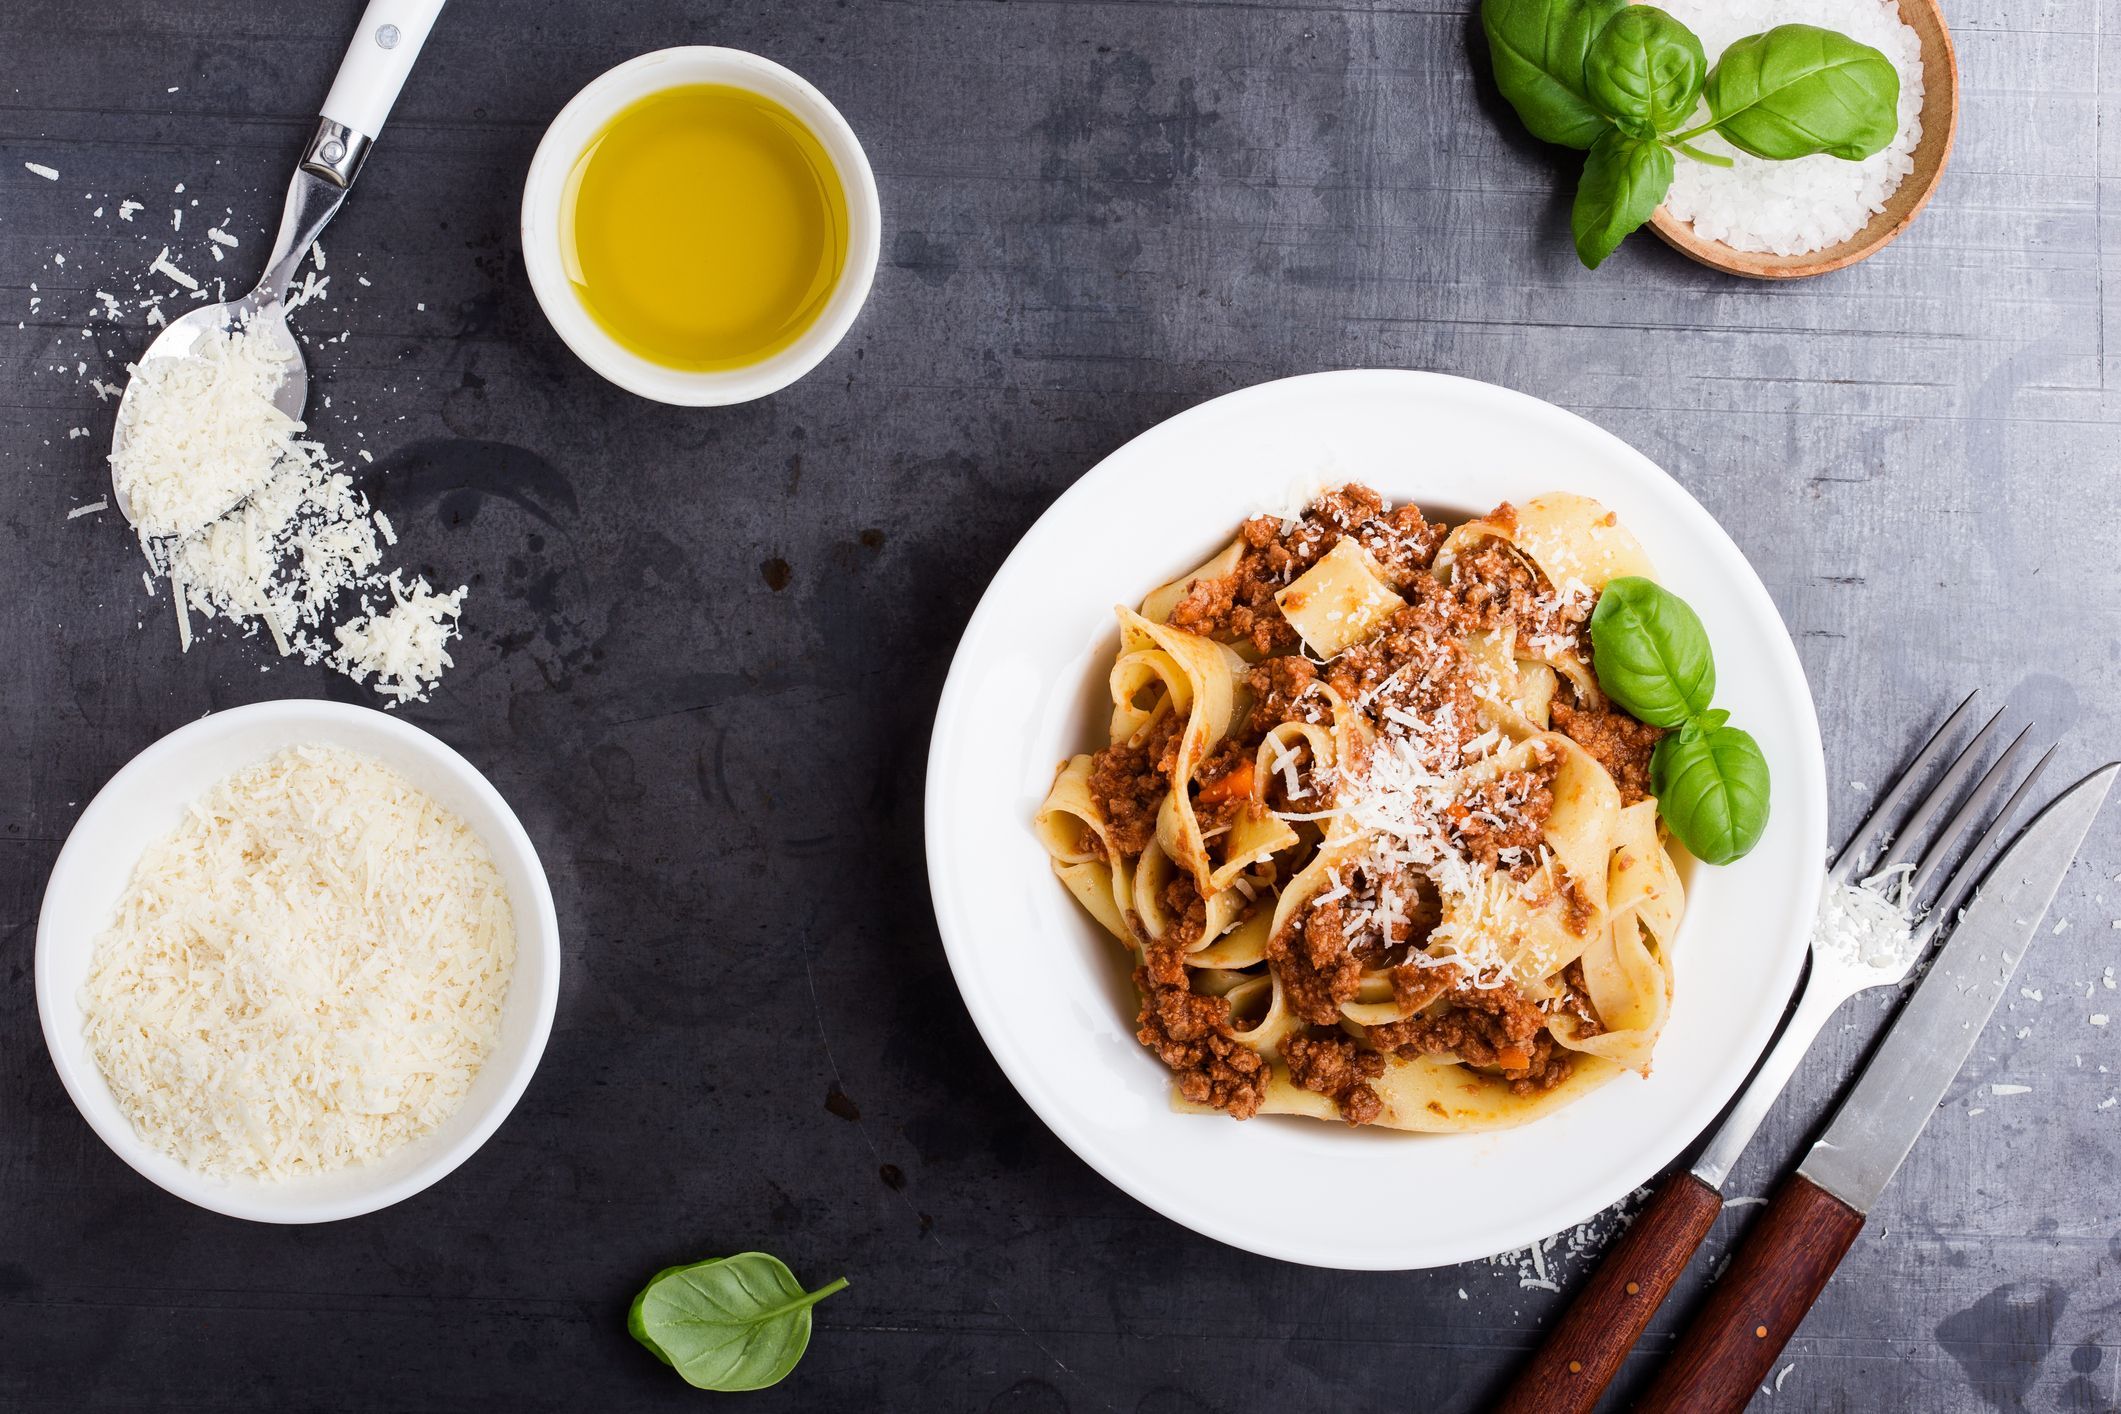 10 different varieties of Pasta that you need to know about